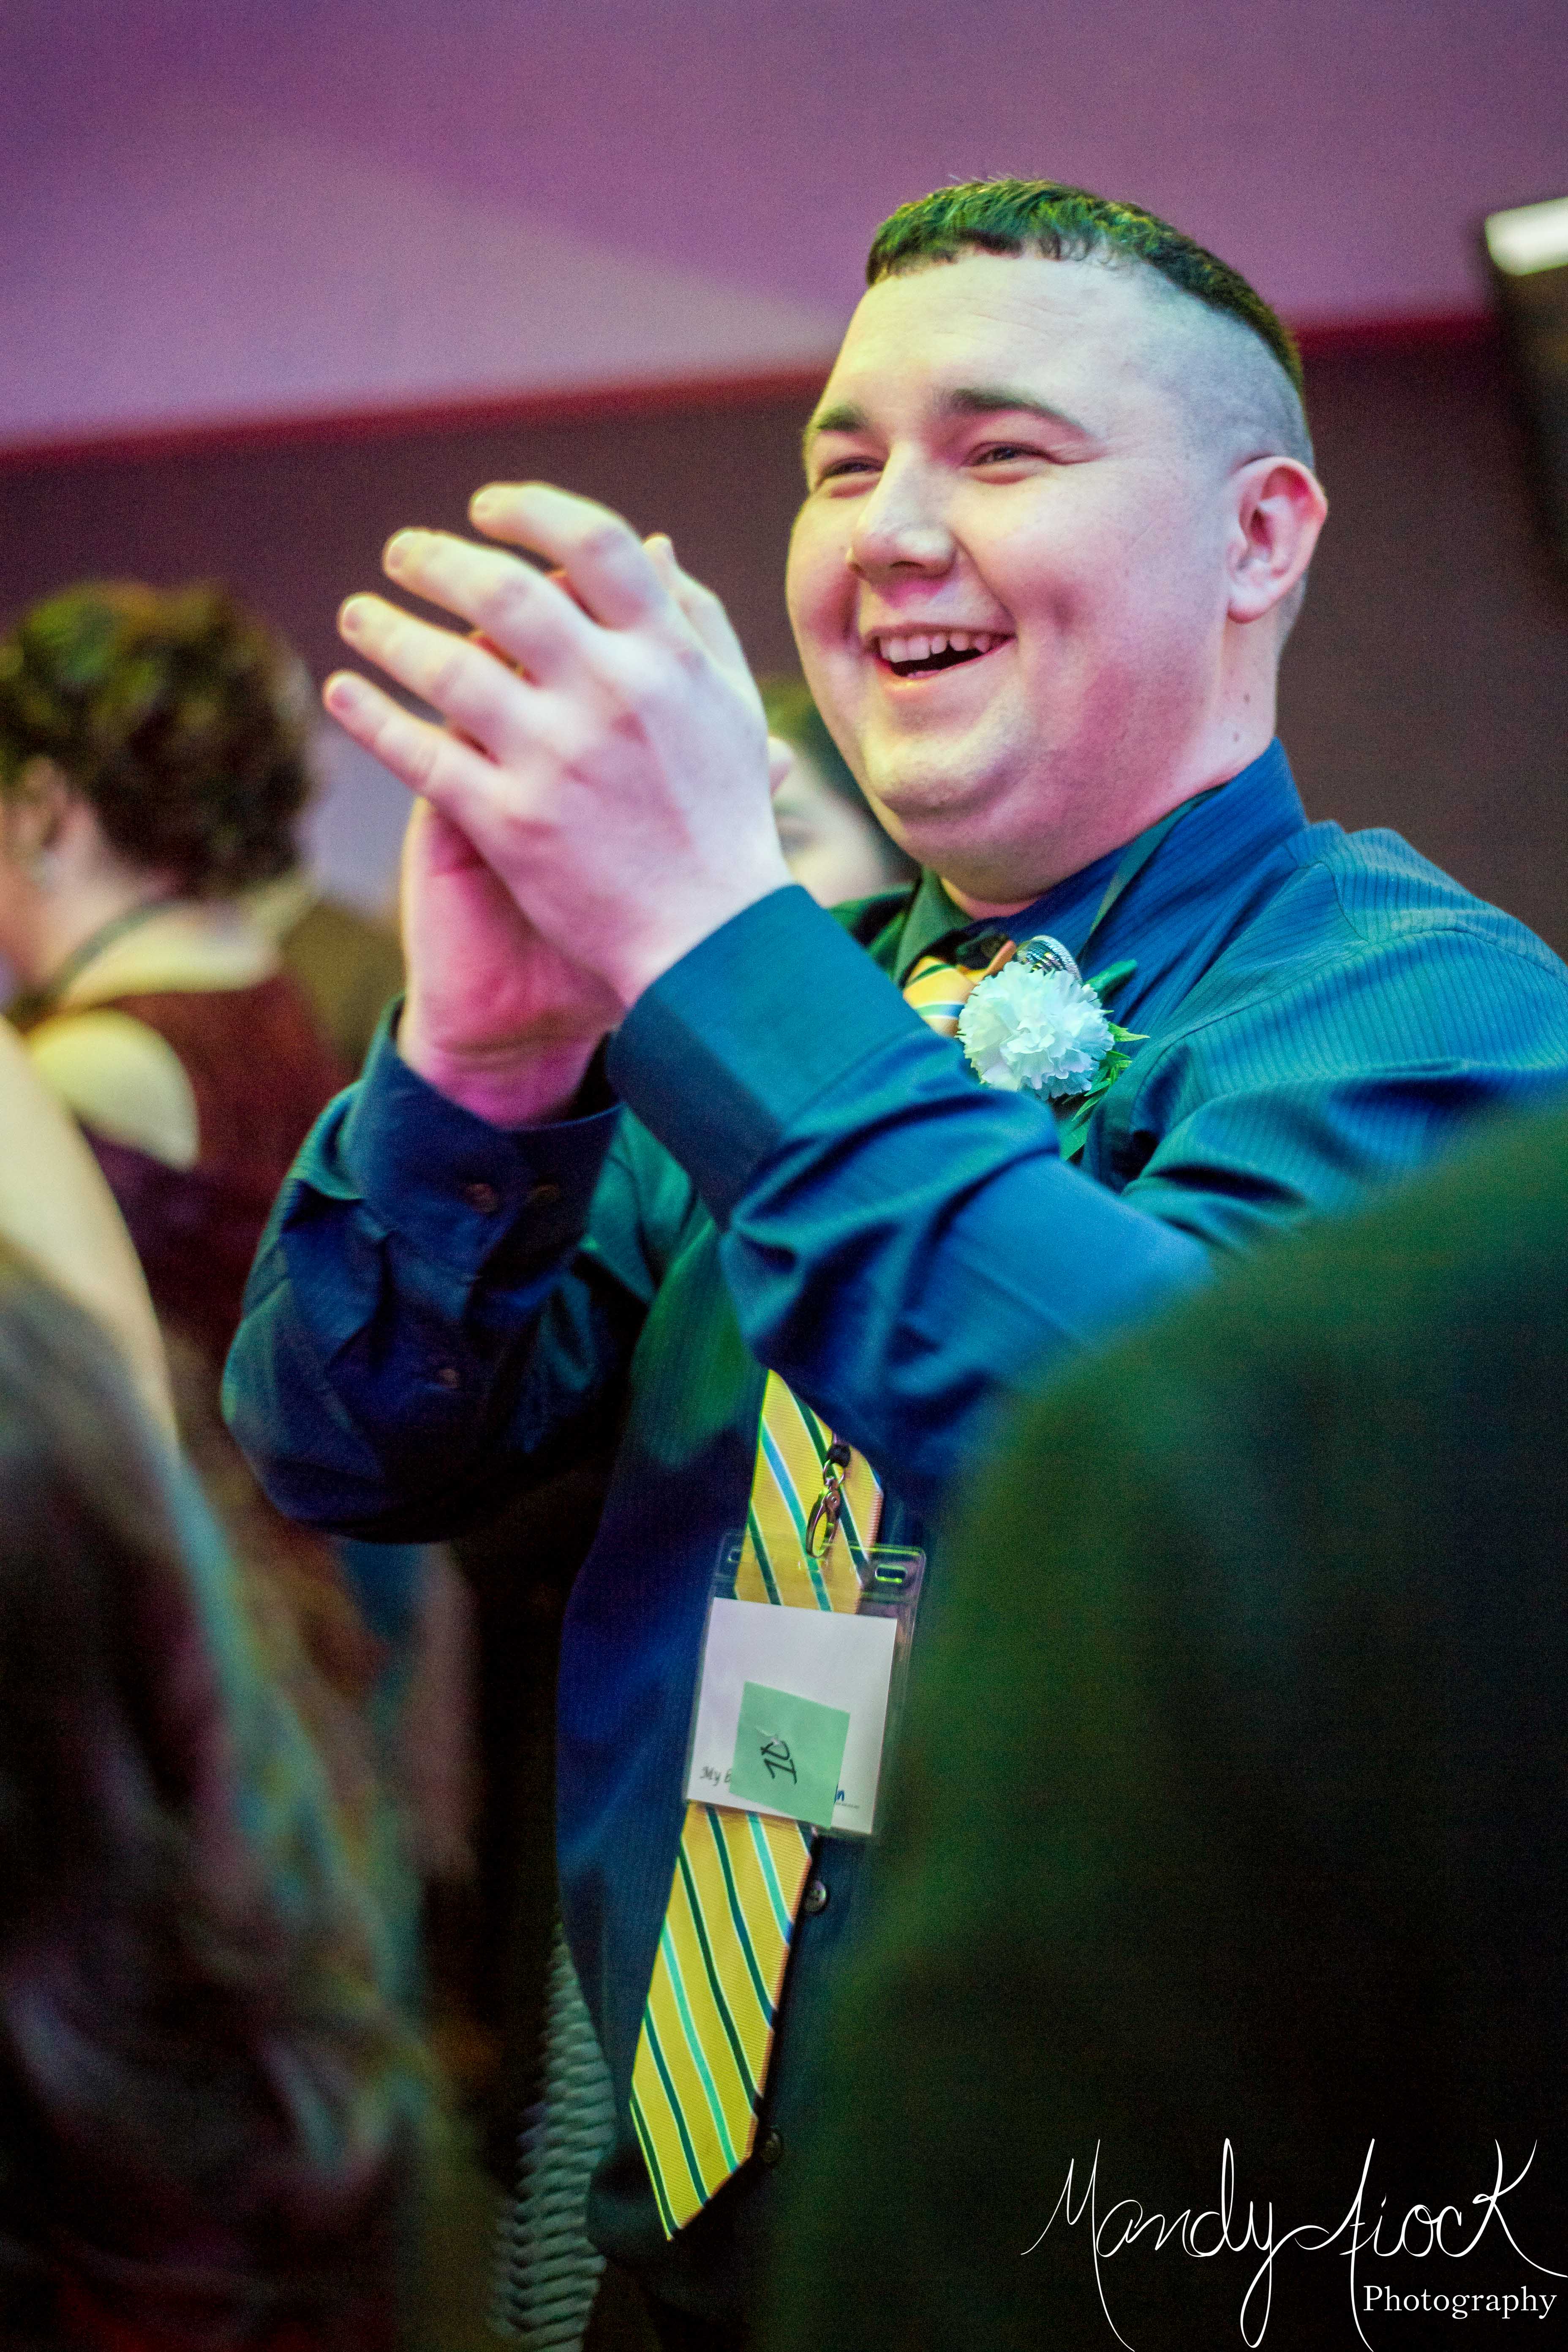 Photos from the 2019 Night to Shine Special Needs Prom by Mandy Fiock Photography